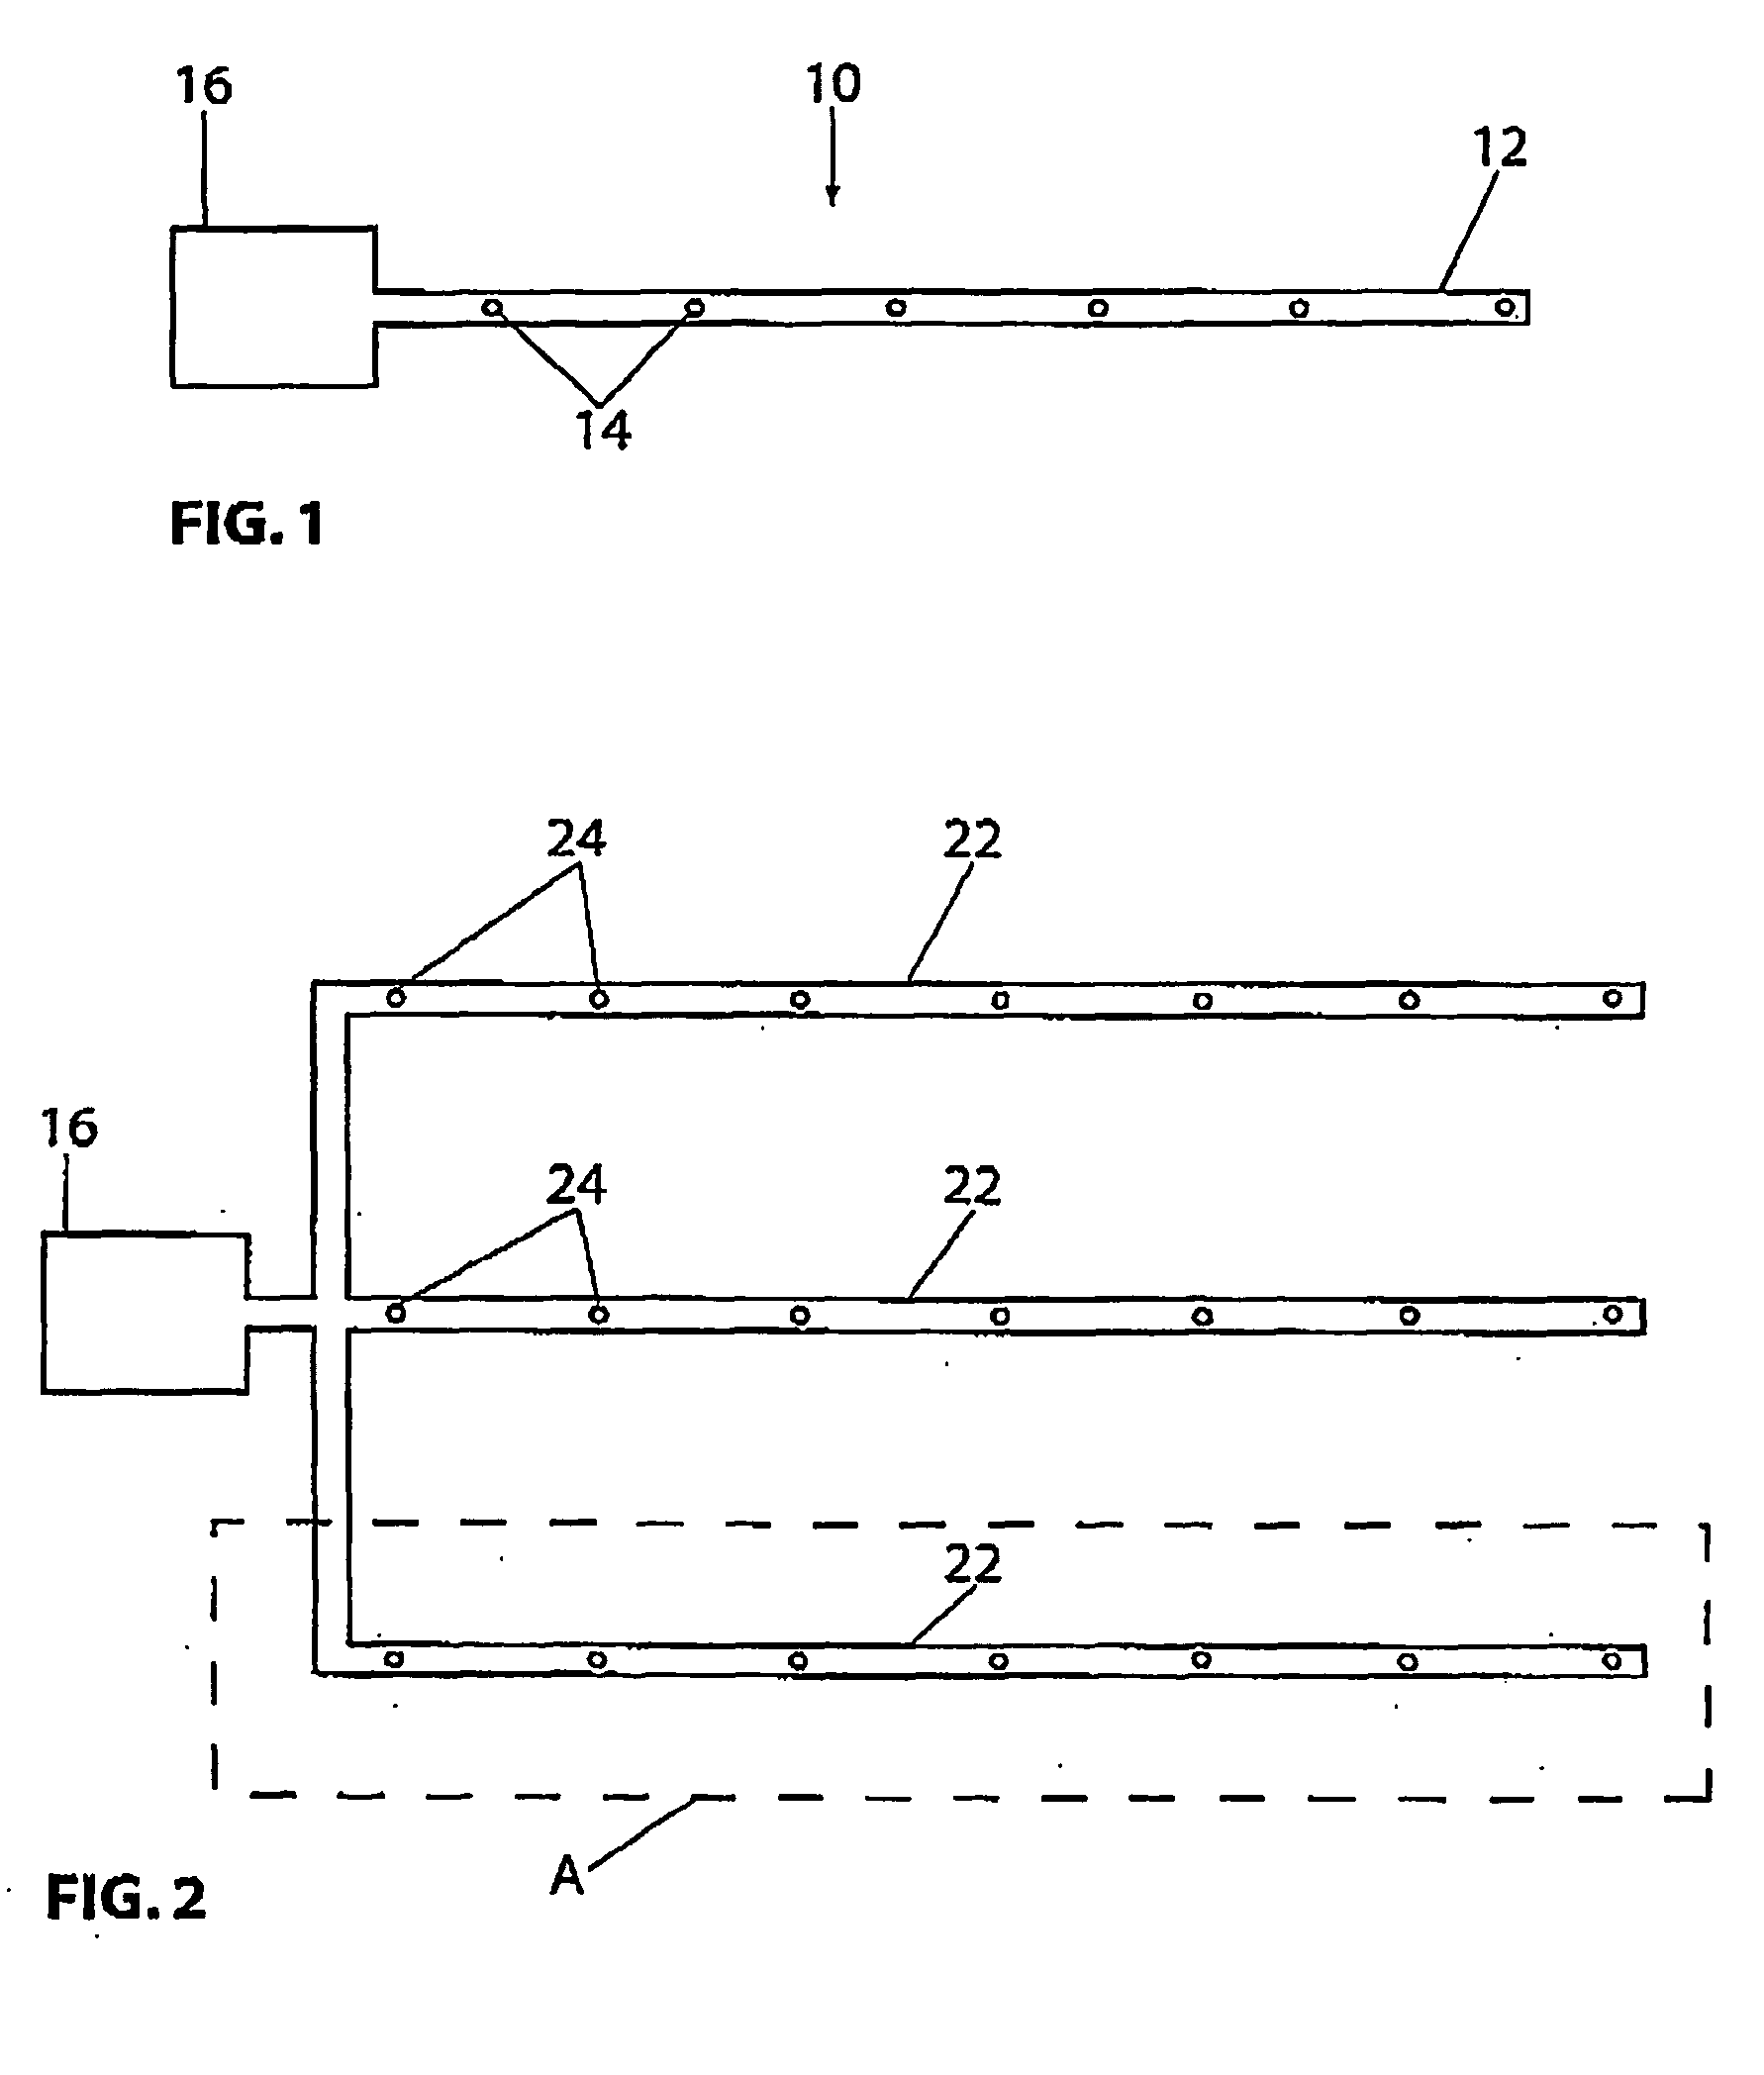 Method and apparatus for determining operational condition of pollution monitoring equipment